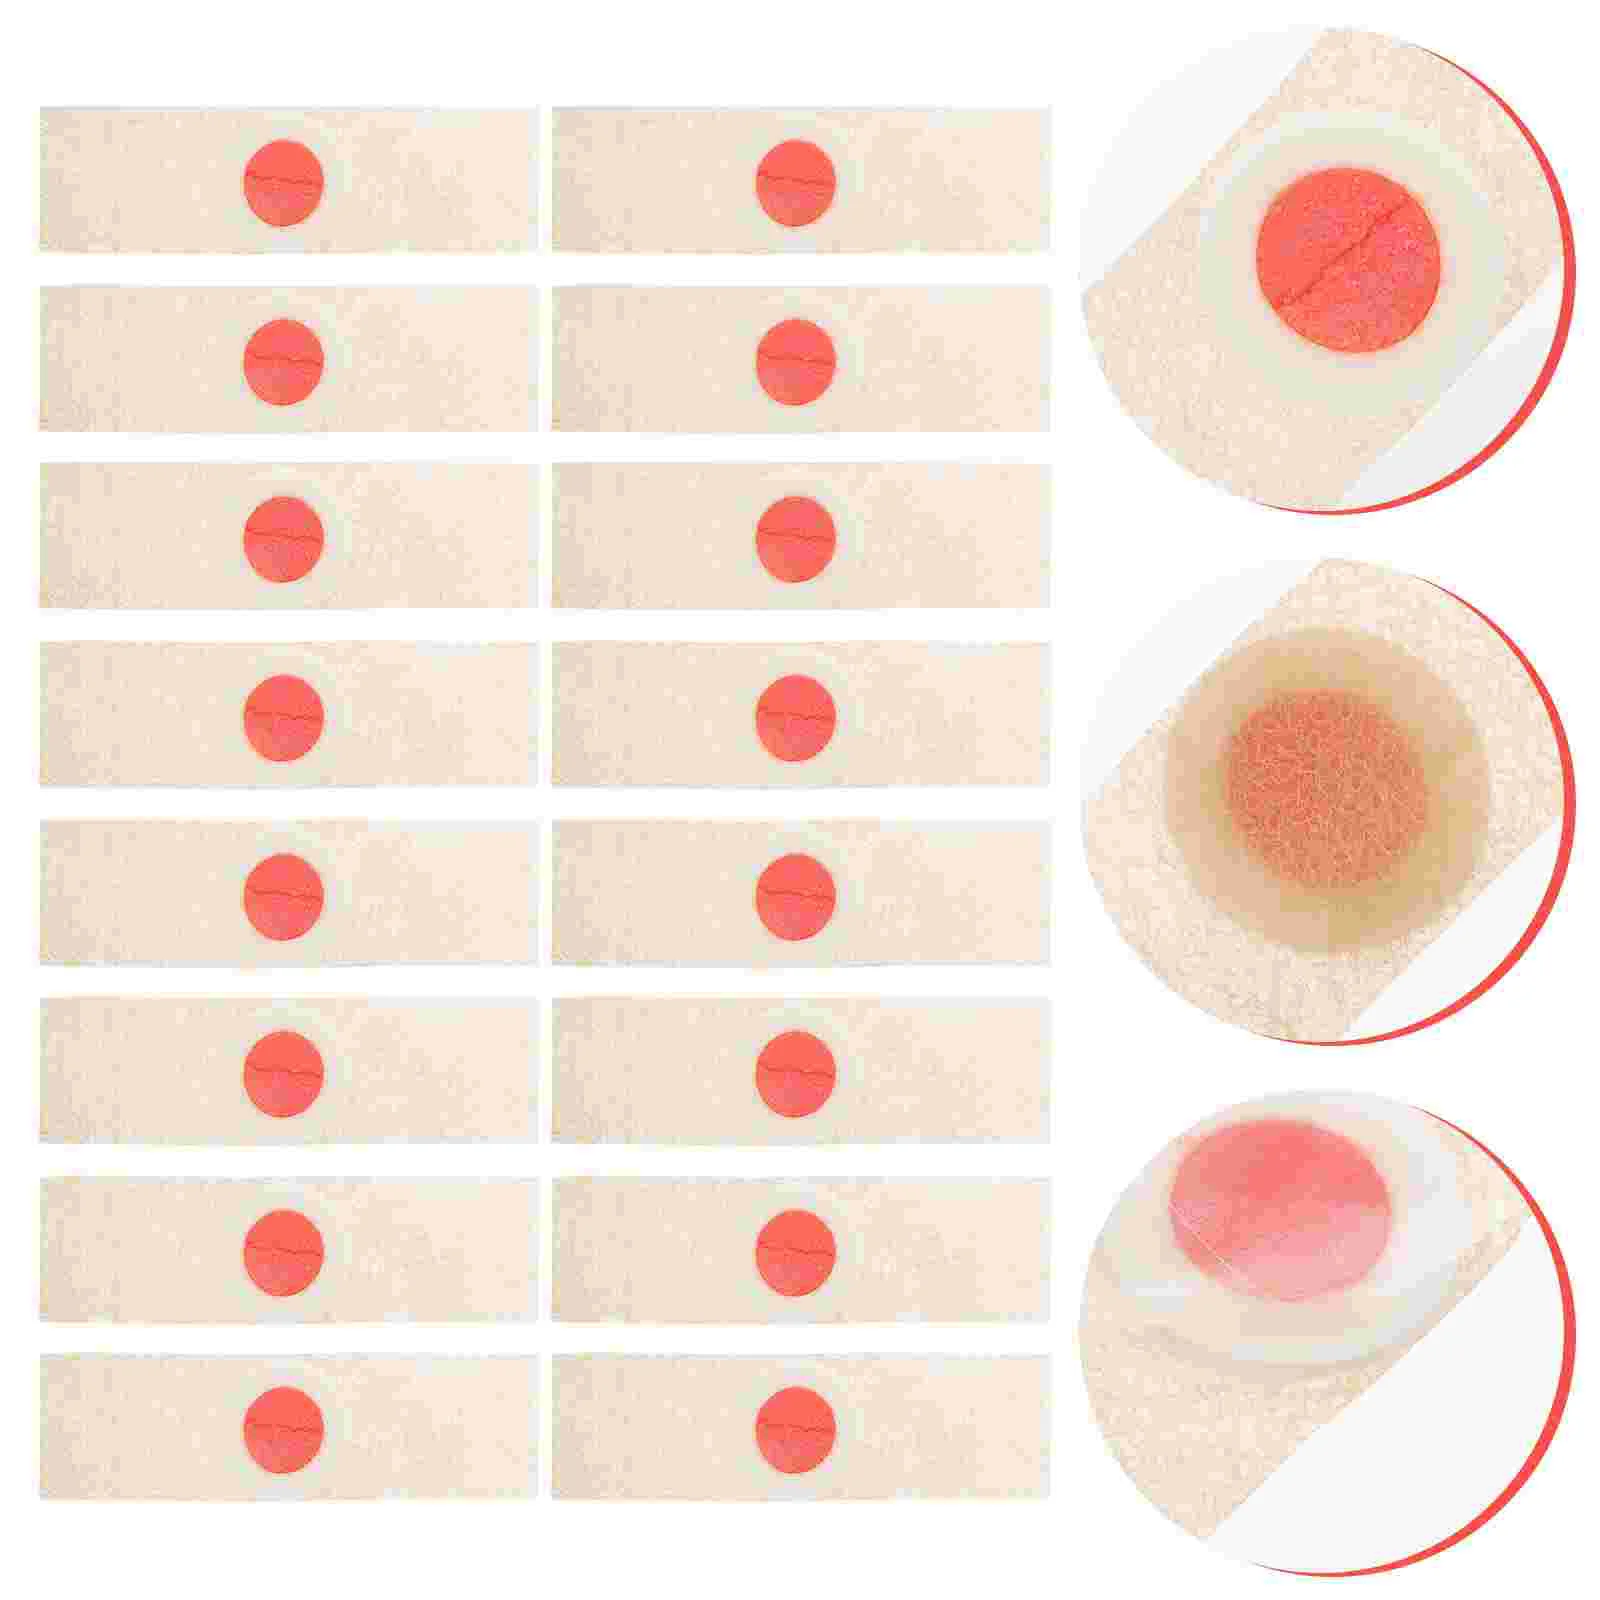 

Corn Toe Pads Callus Pad Cushions Protector Cushion Bunion Remover Treatment Self Adhesive Removal Sticker